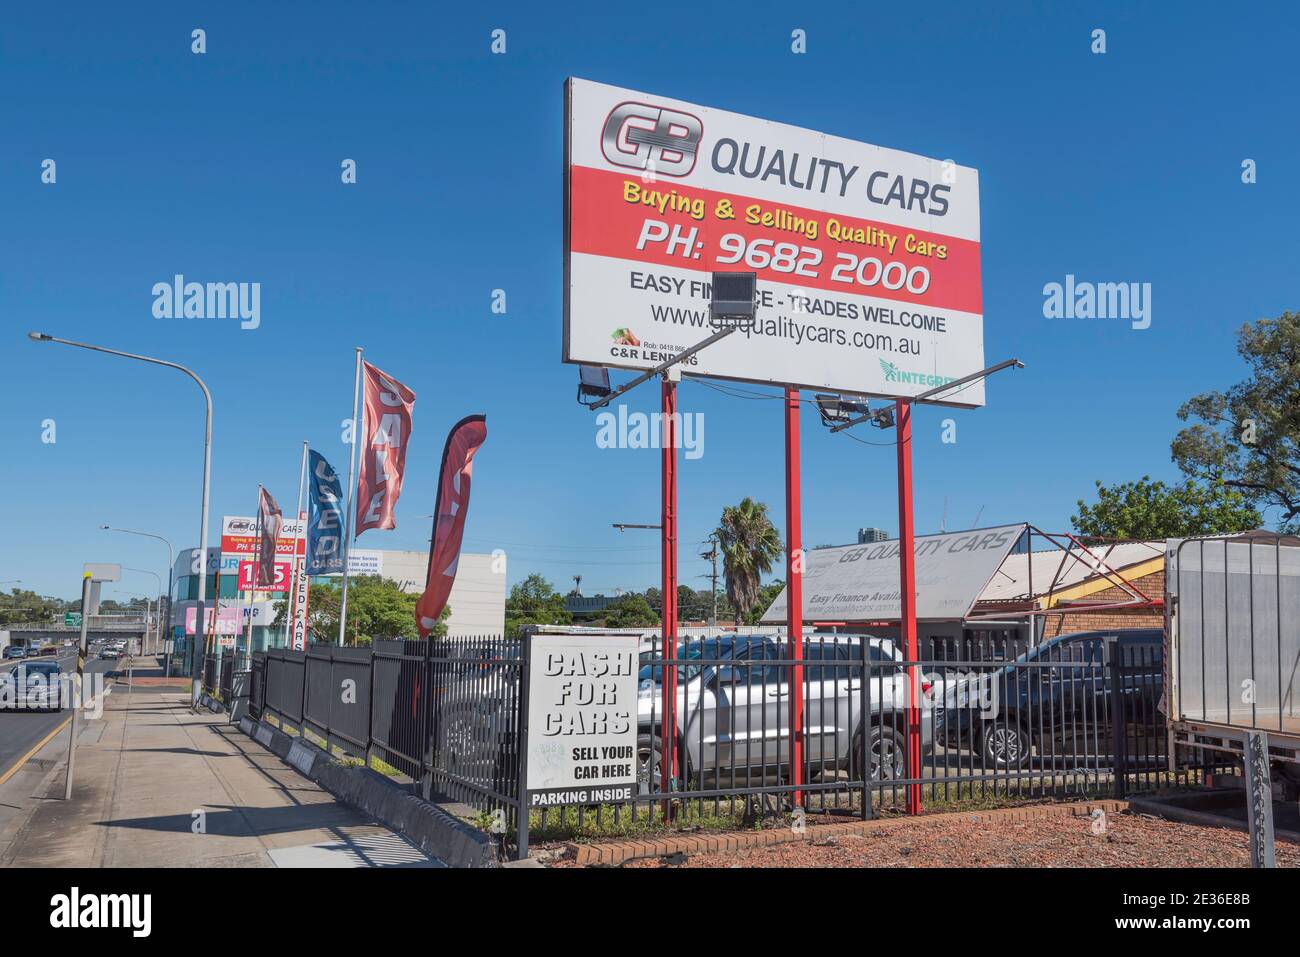 A small, independent used car dealership on Parramatta Road in western Sydney, Australia Stock Photo